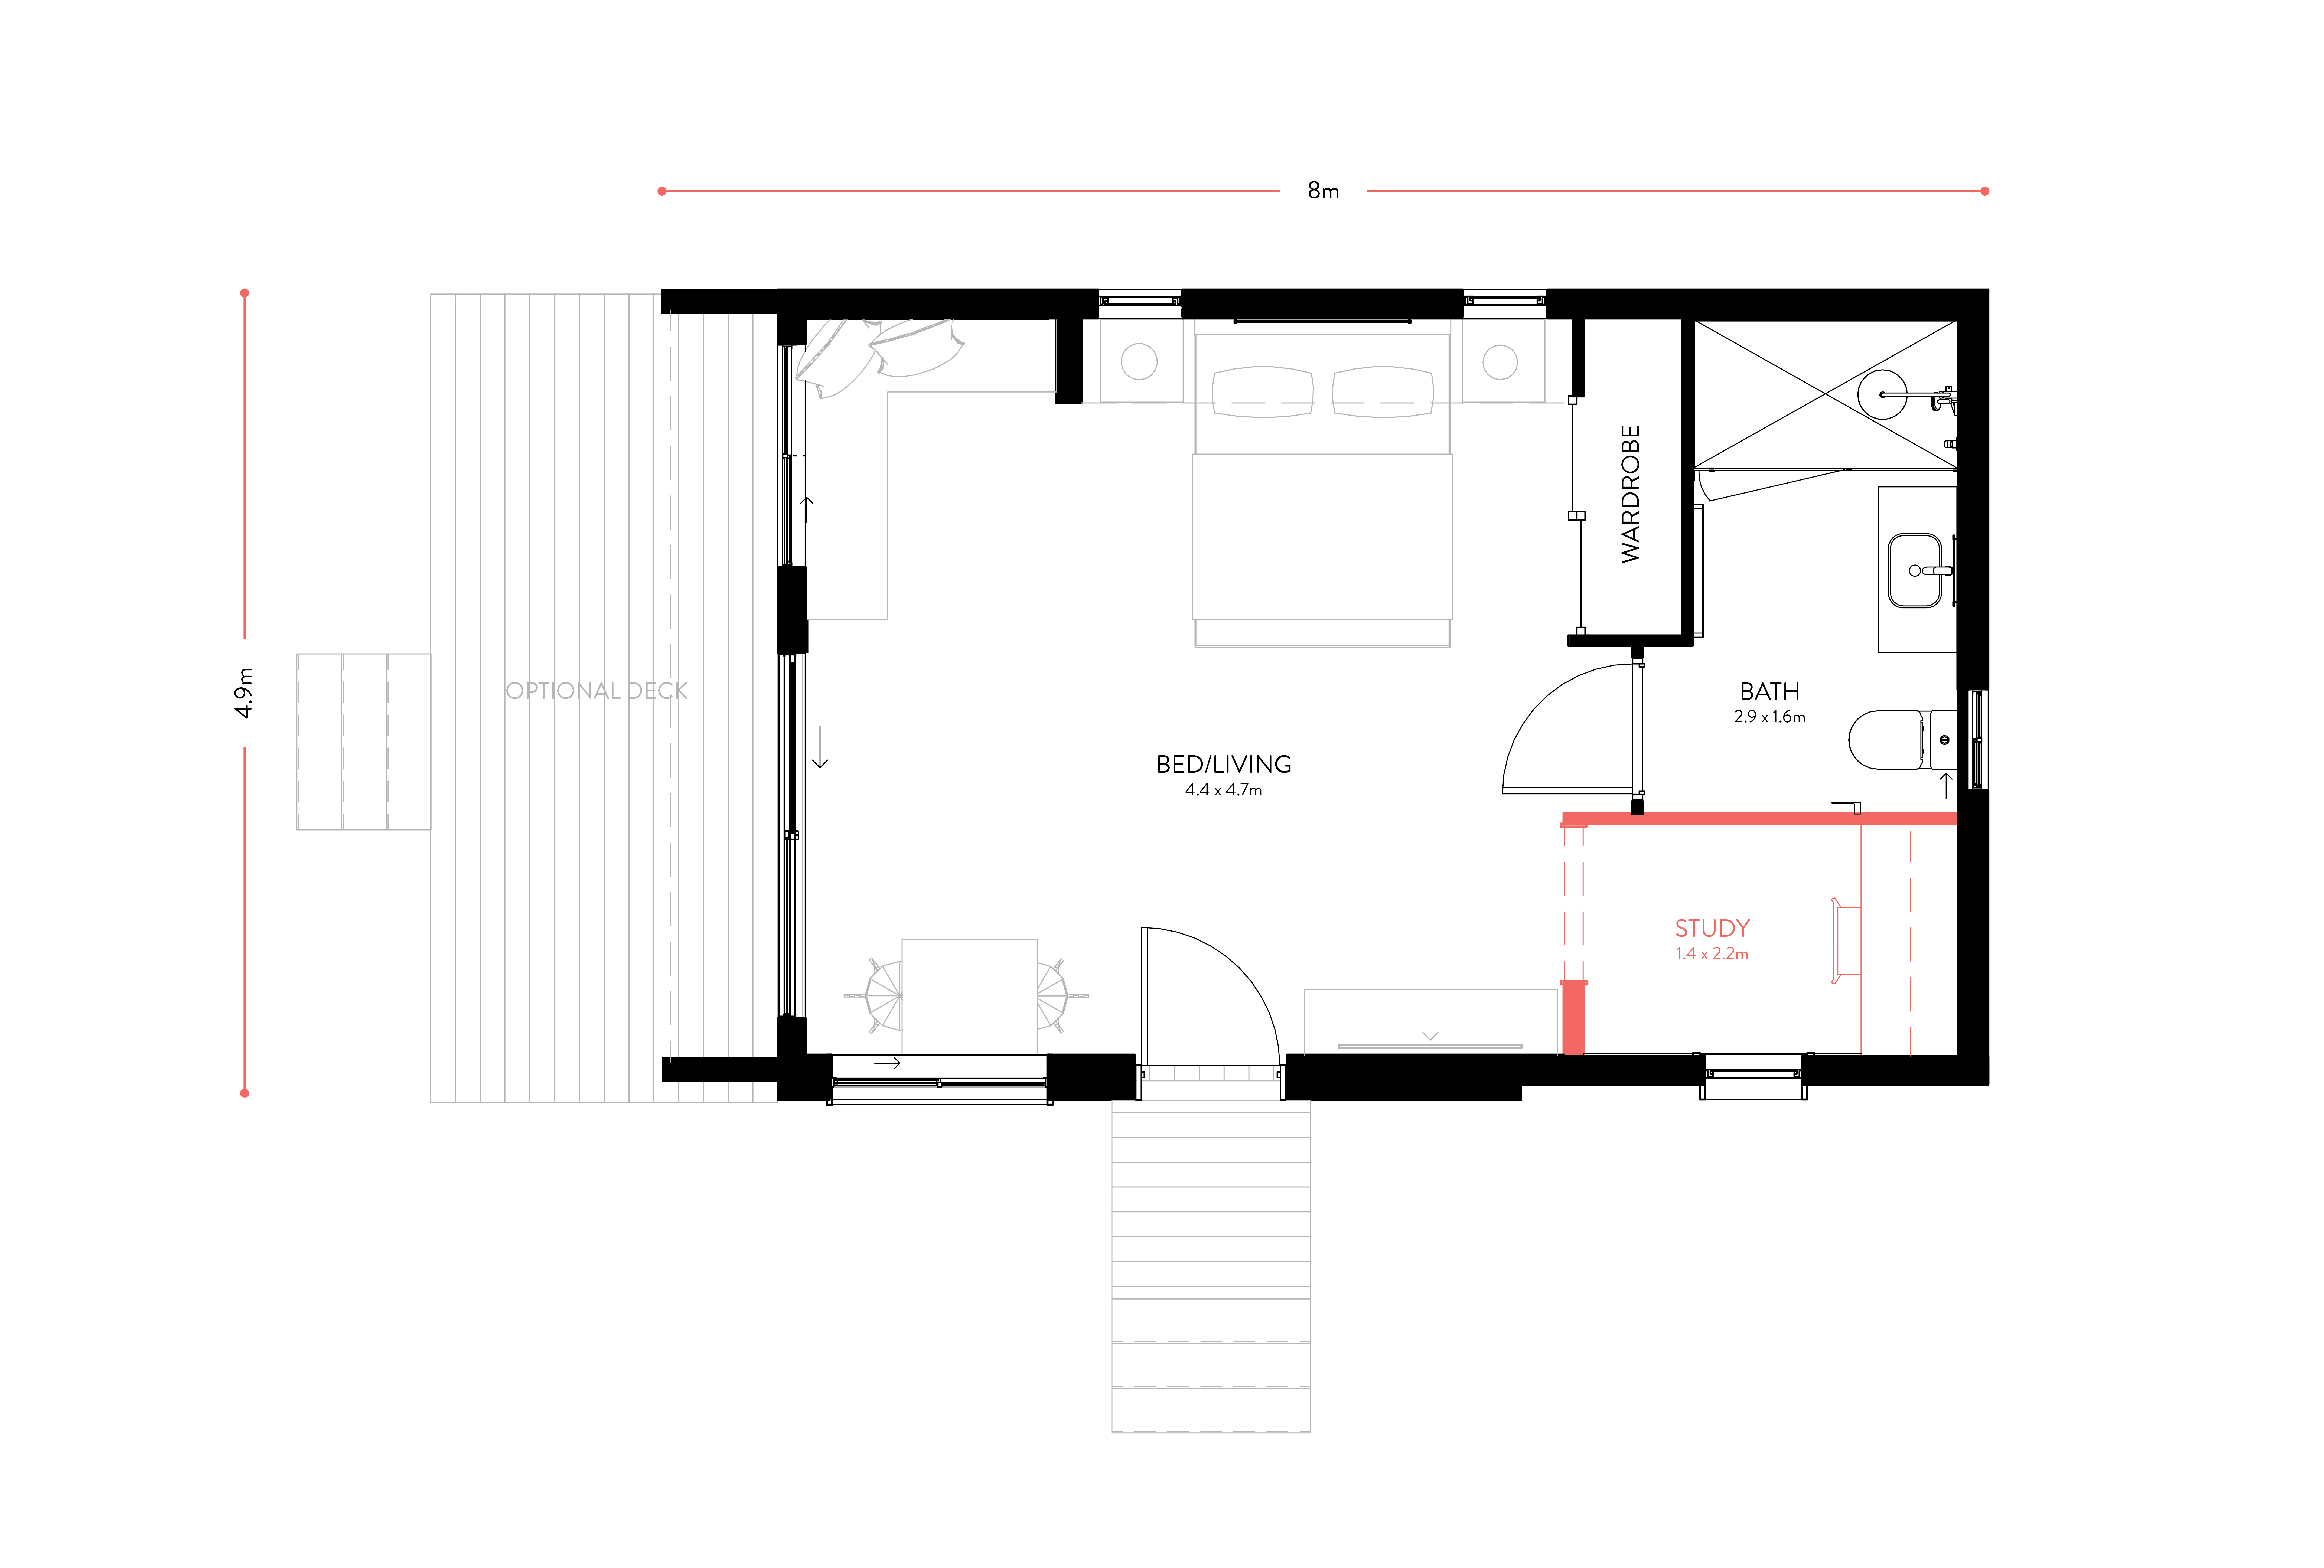 Floorplan of PLACEit modular home - Hobby with study